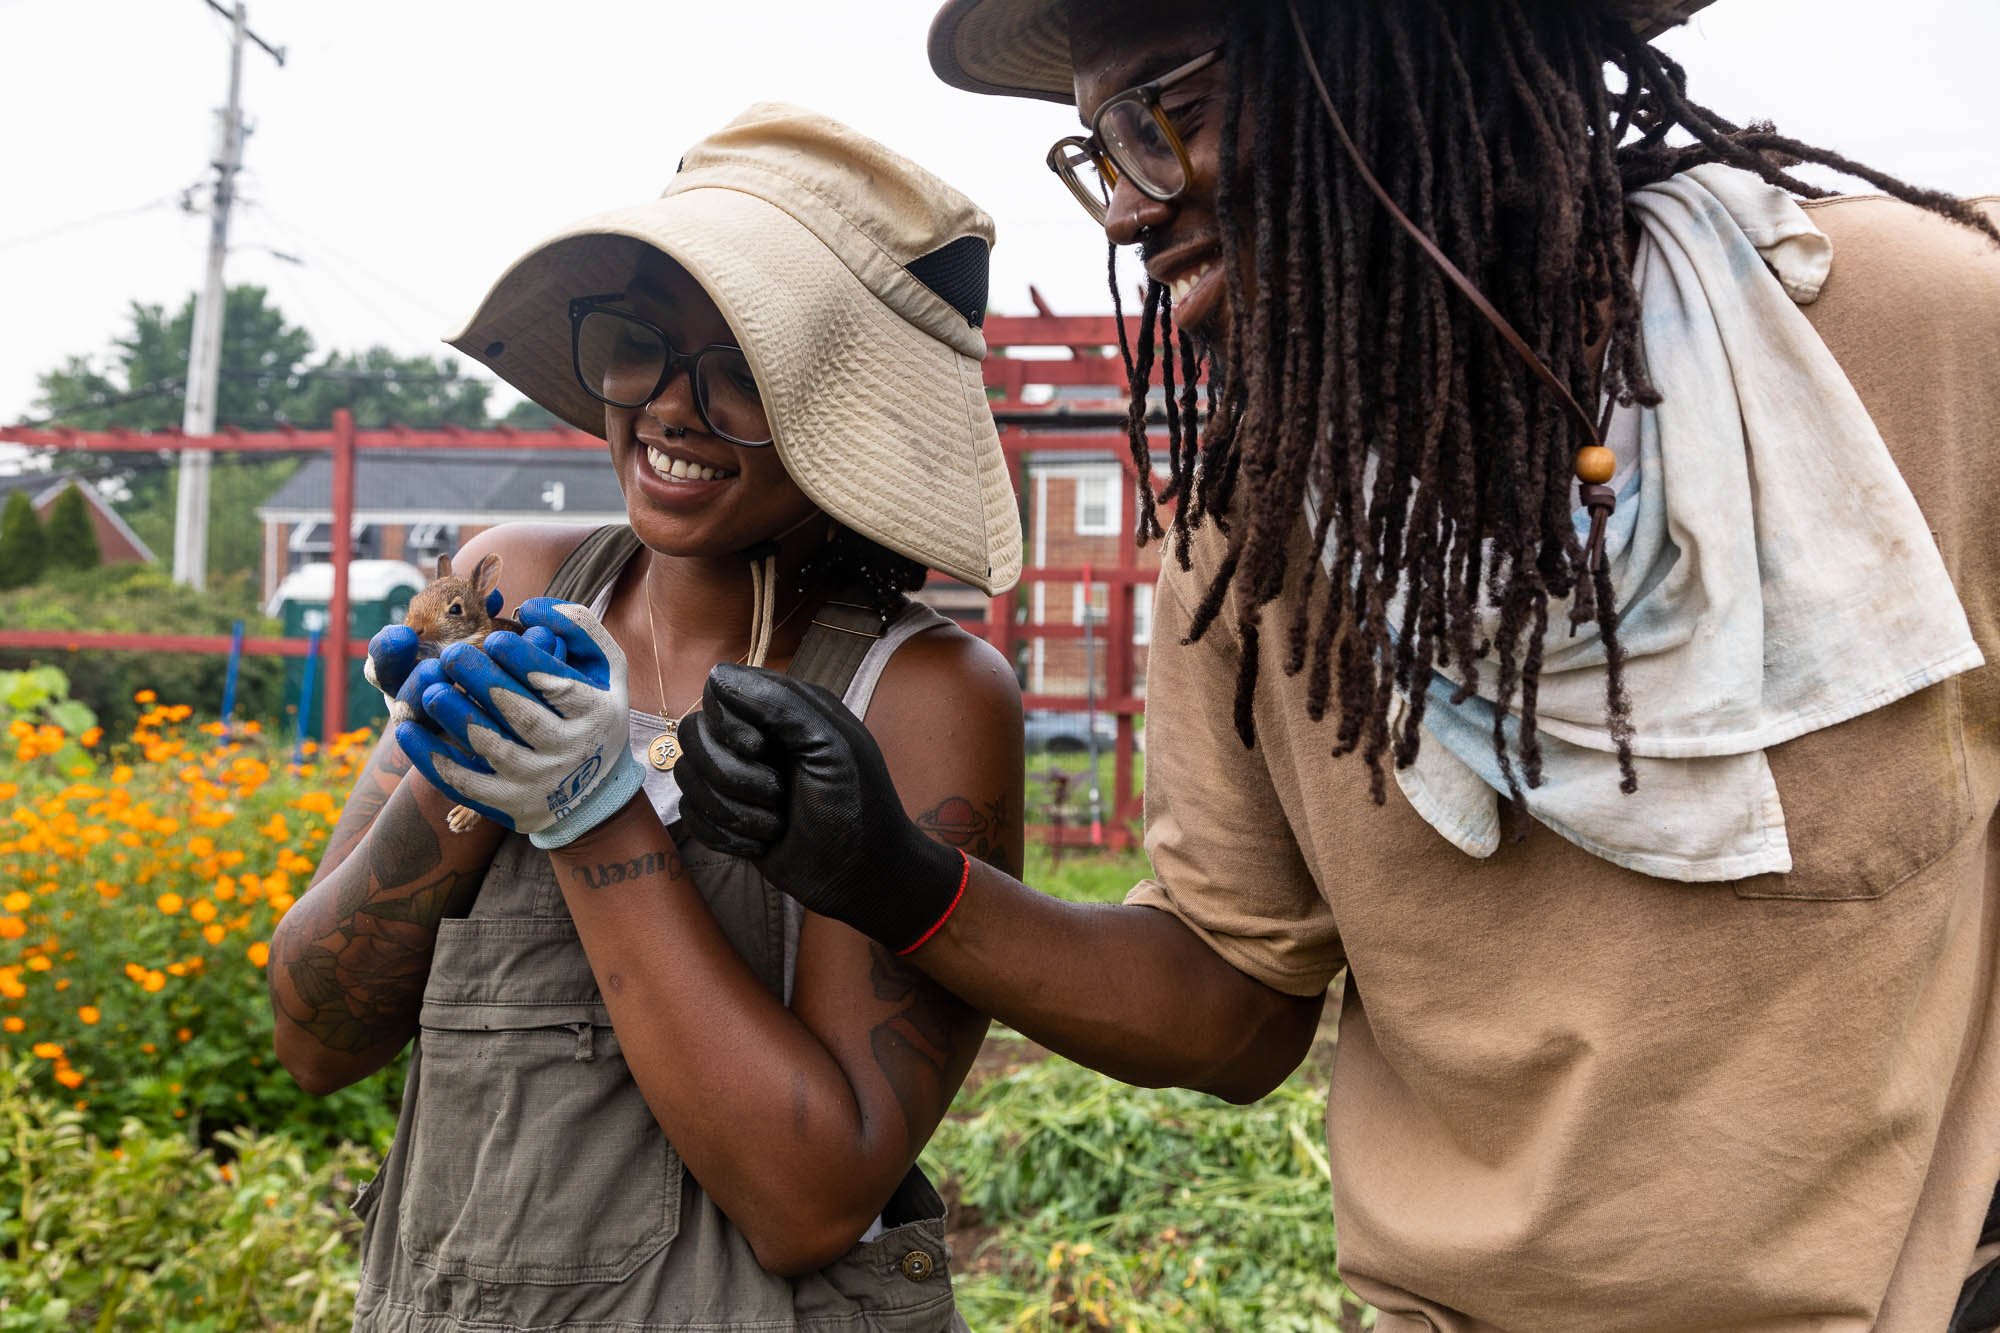  Saj Dillard shows Jordan Bethea a baby rabbit she found roaming the grow space at BLISS Meadows in Baltimore, Md. on July 17, 2023. Before working at BLISS, Dillard spent little time outside; her advice for people like her was, “Get outside, hug a t